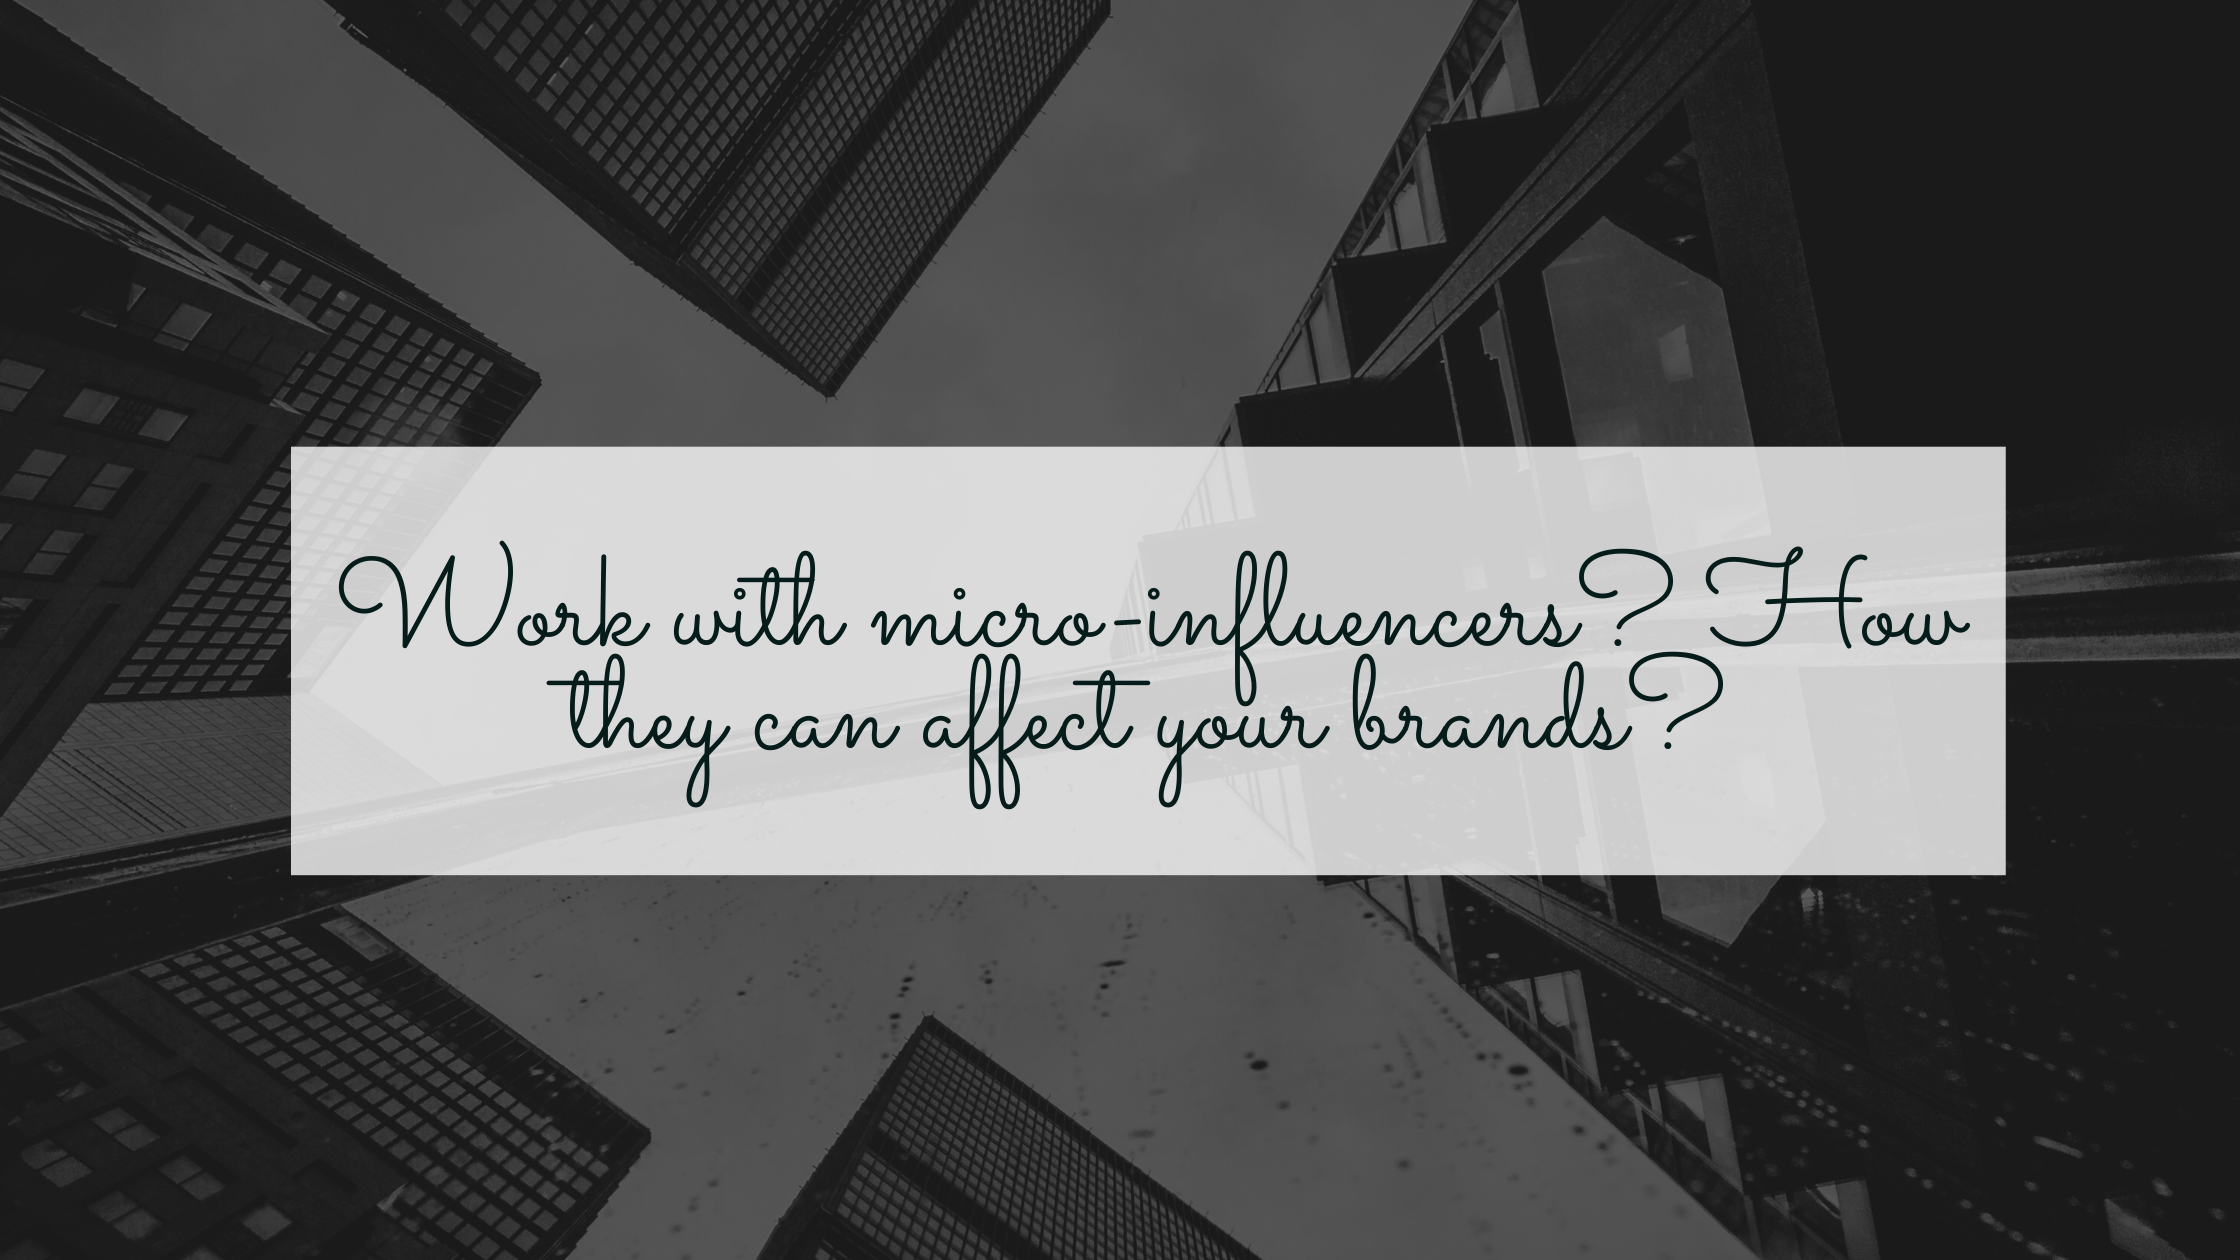 Work with micro-influencers? How they can affect your brands?